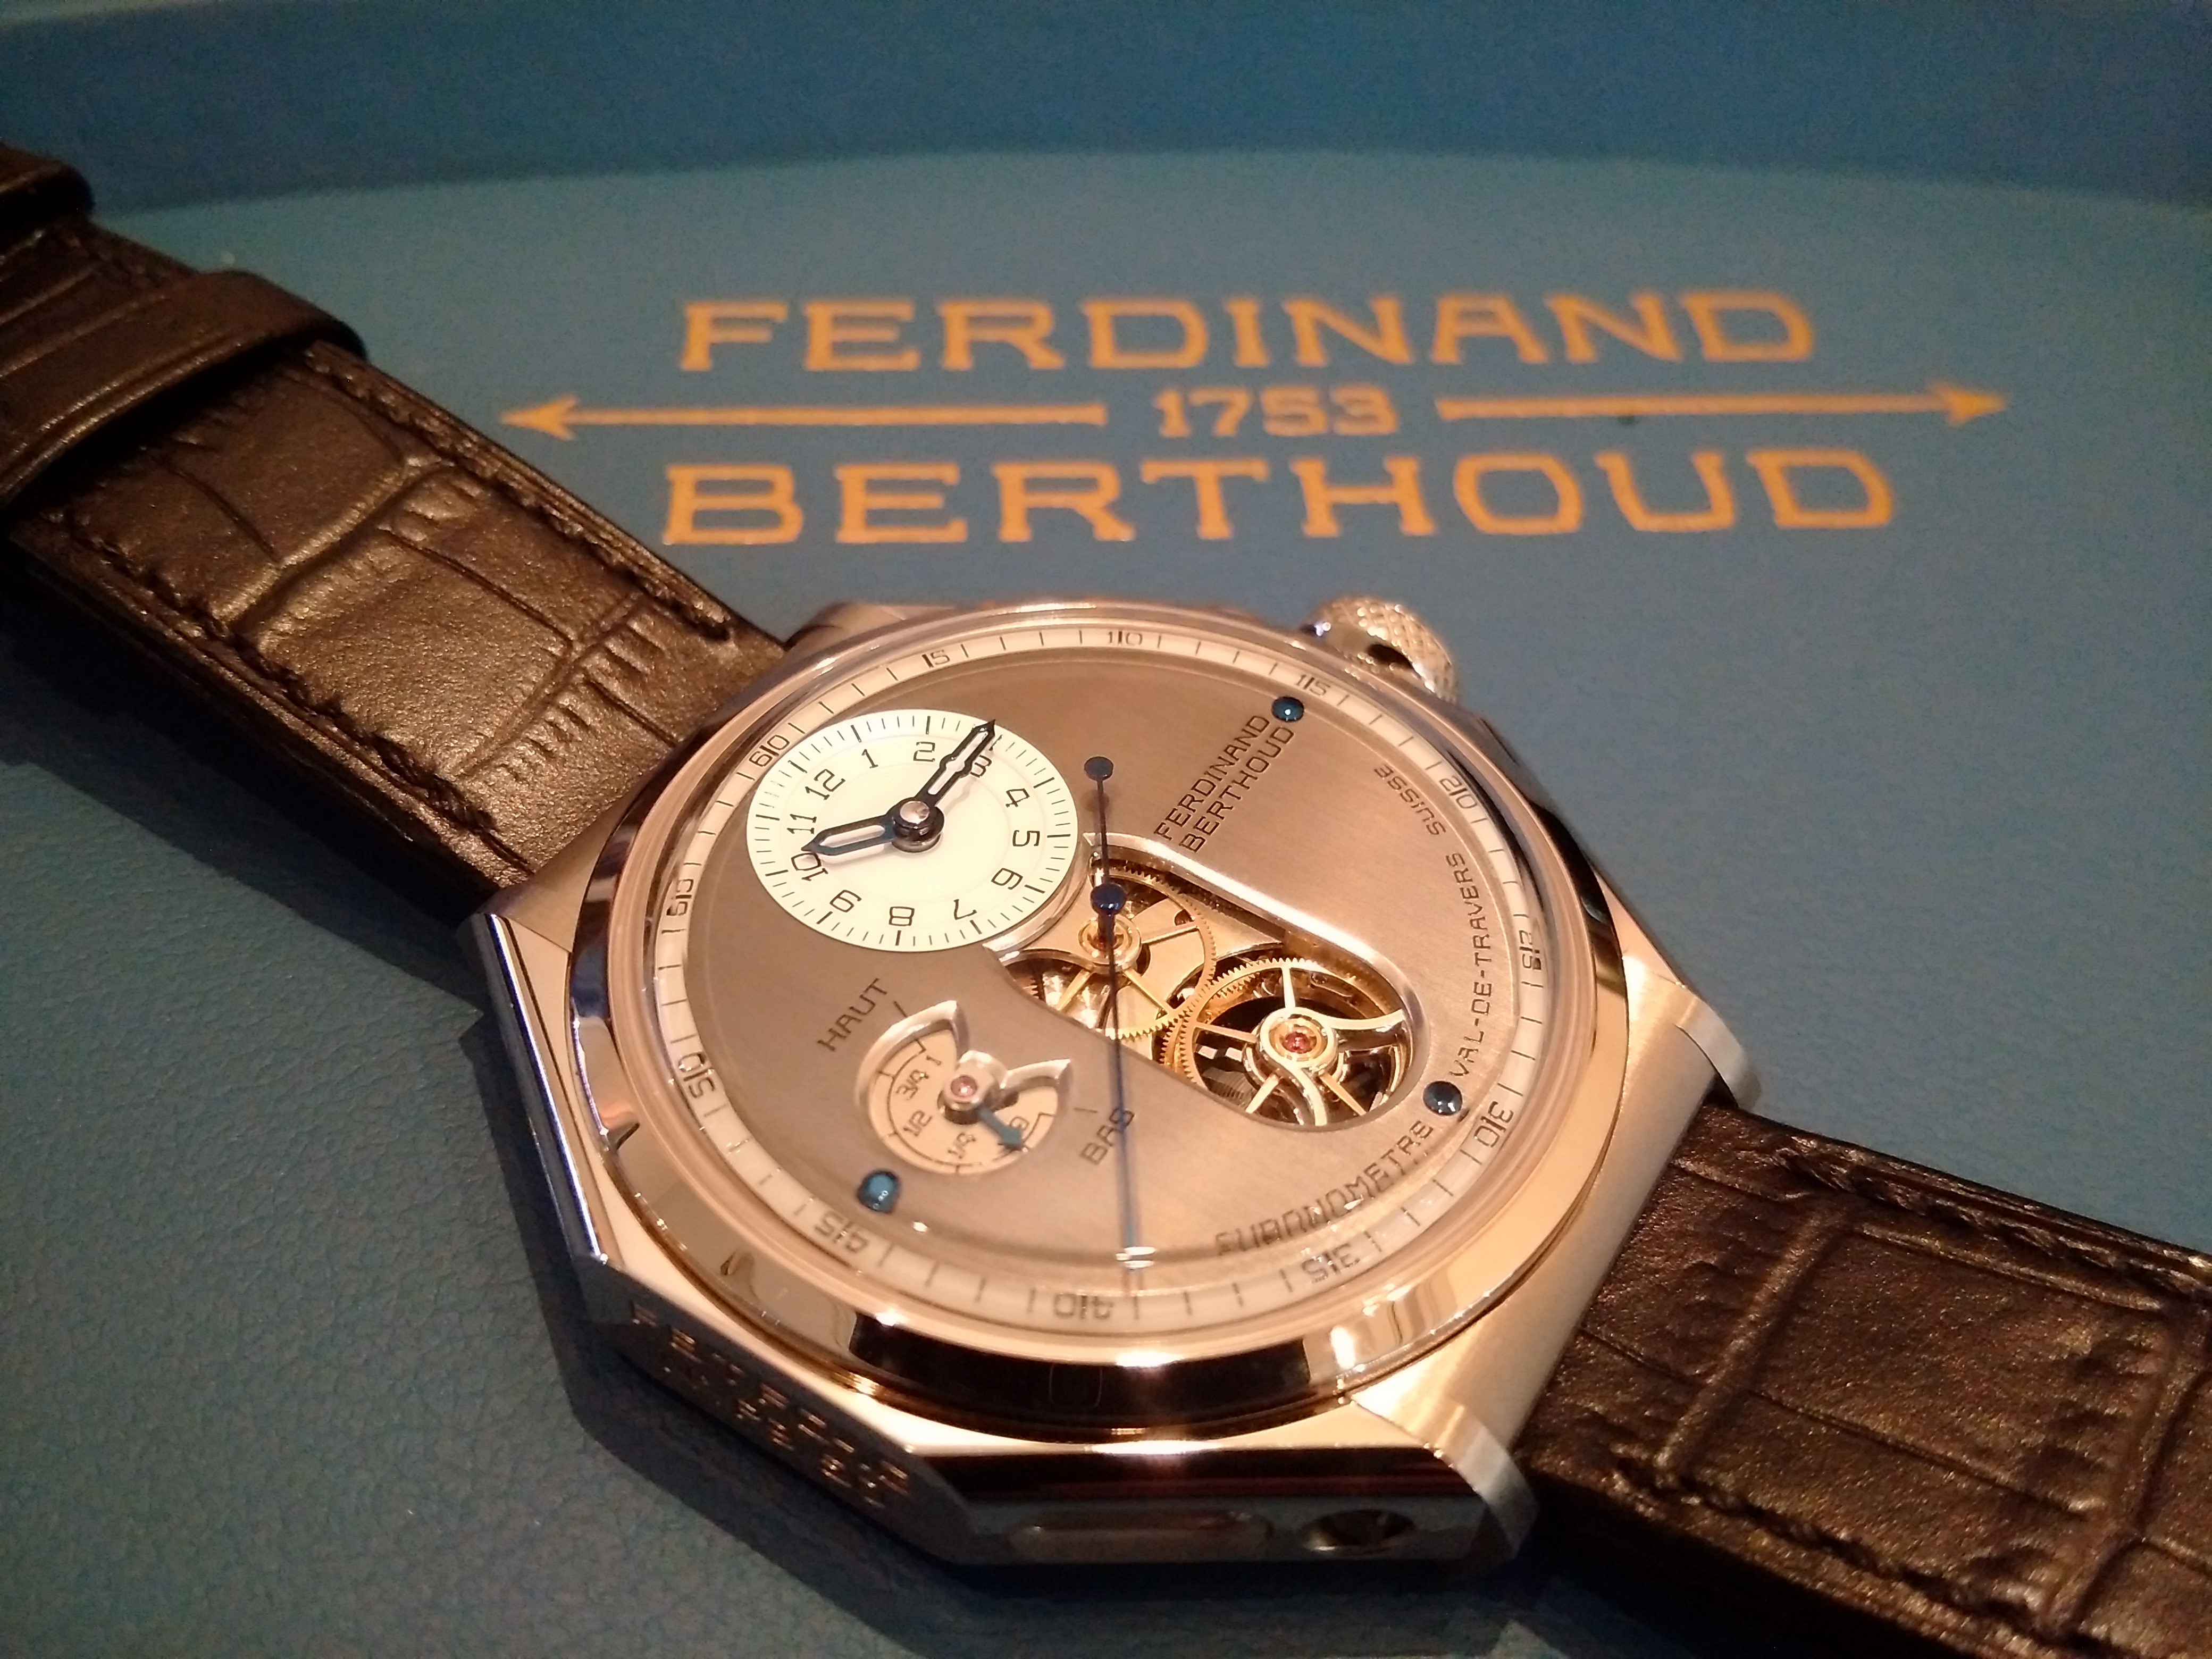 Rose Gold edition of the GPHG 2016 “AIGUILLE D’OR” - The Ferdinand Berthoud Chronometrie FB 1.